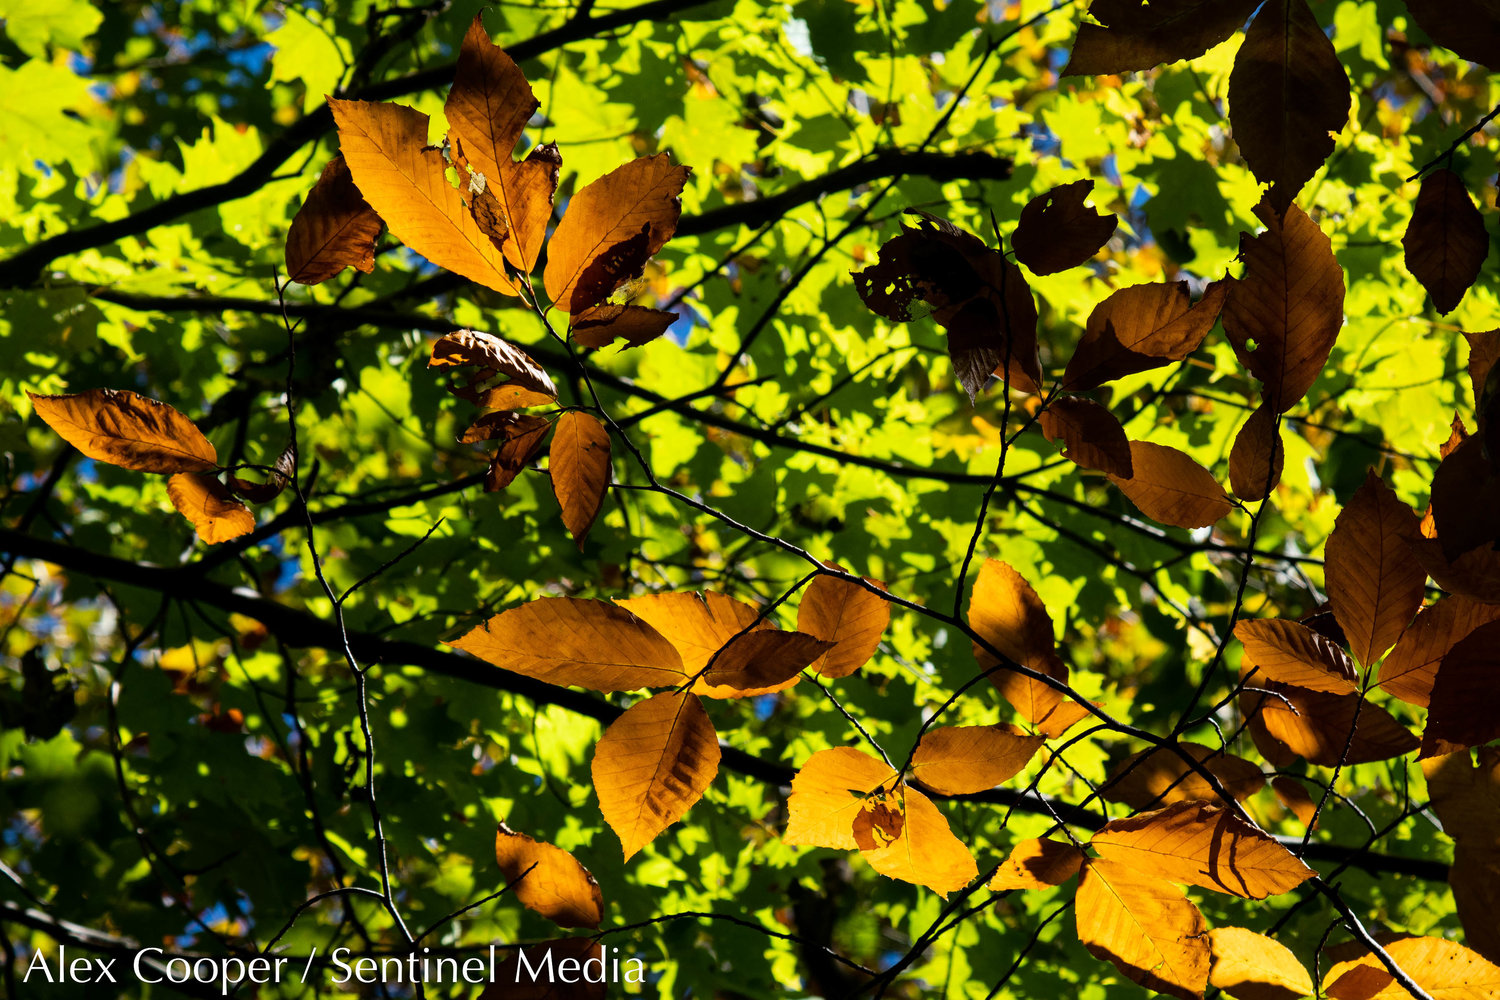 Sunlight shines through leaves at McCauley Mountain on Wednesday, Oct. 5 in Old Forge.